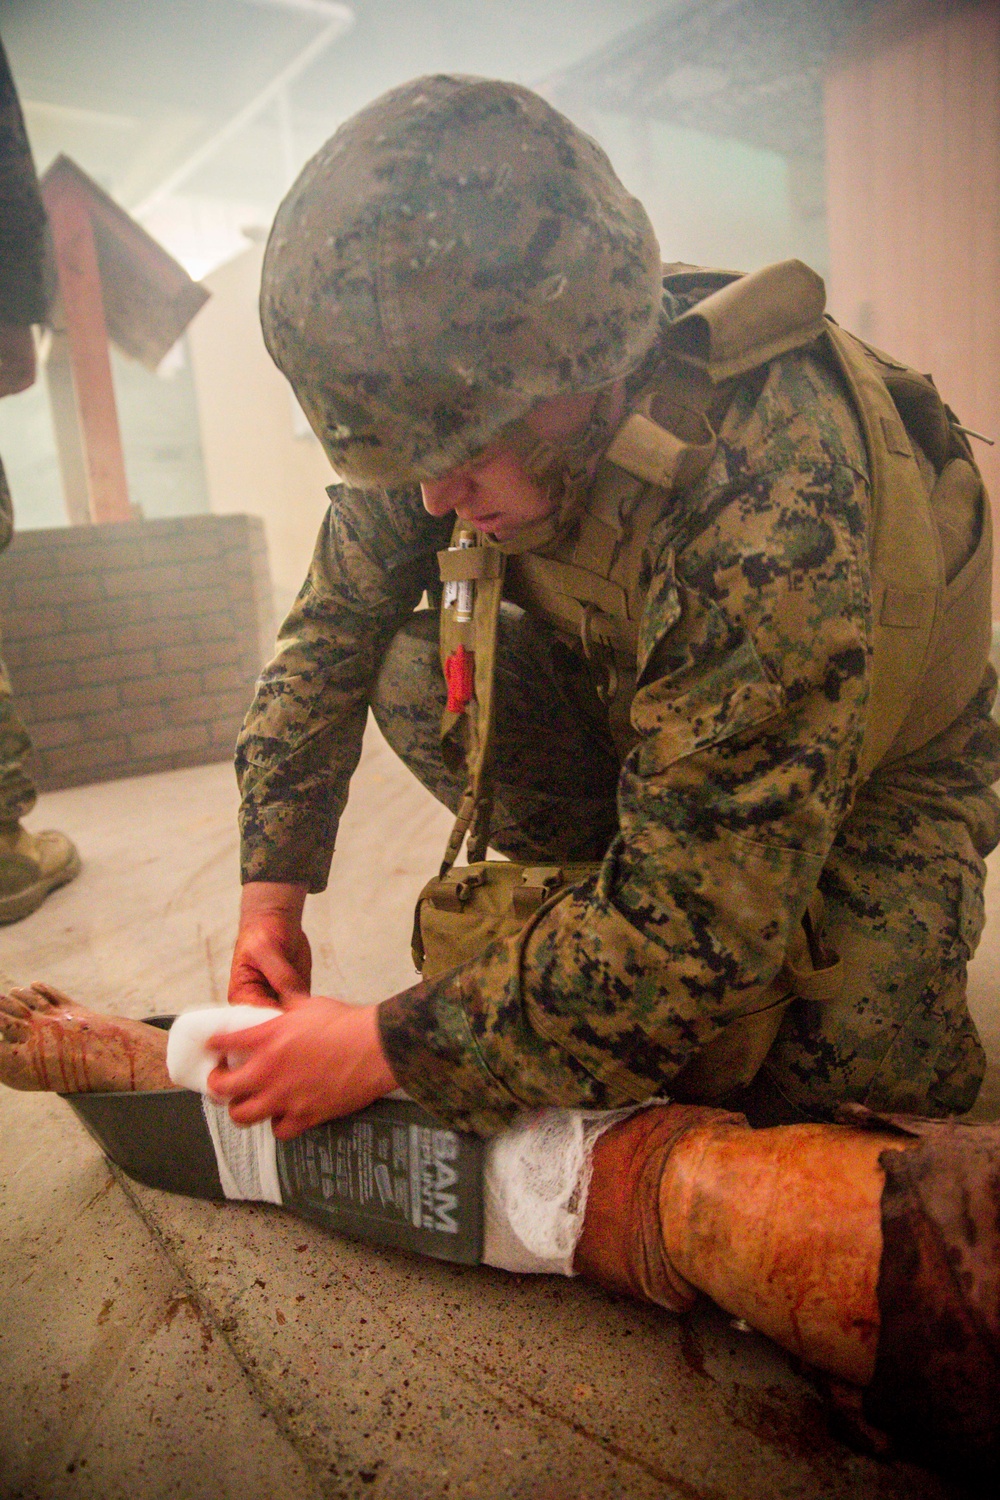 2nd Medical Bn. maintains readiness through TCCC